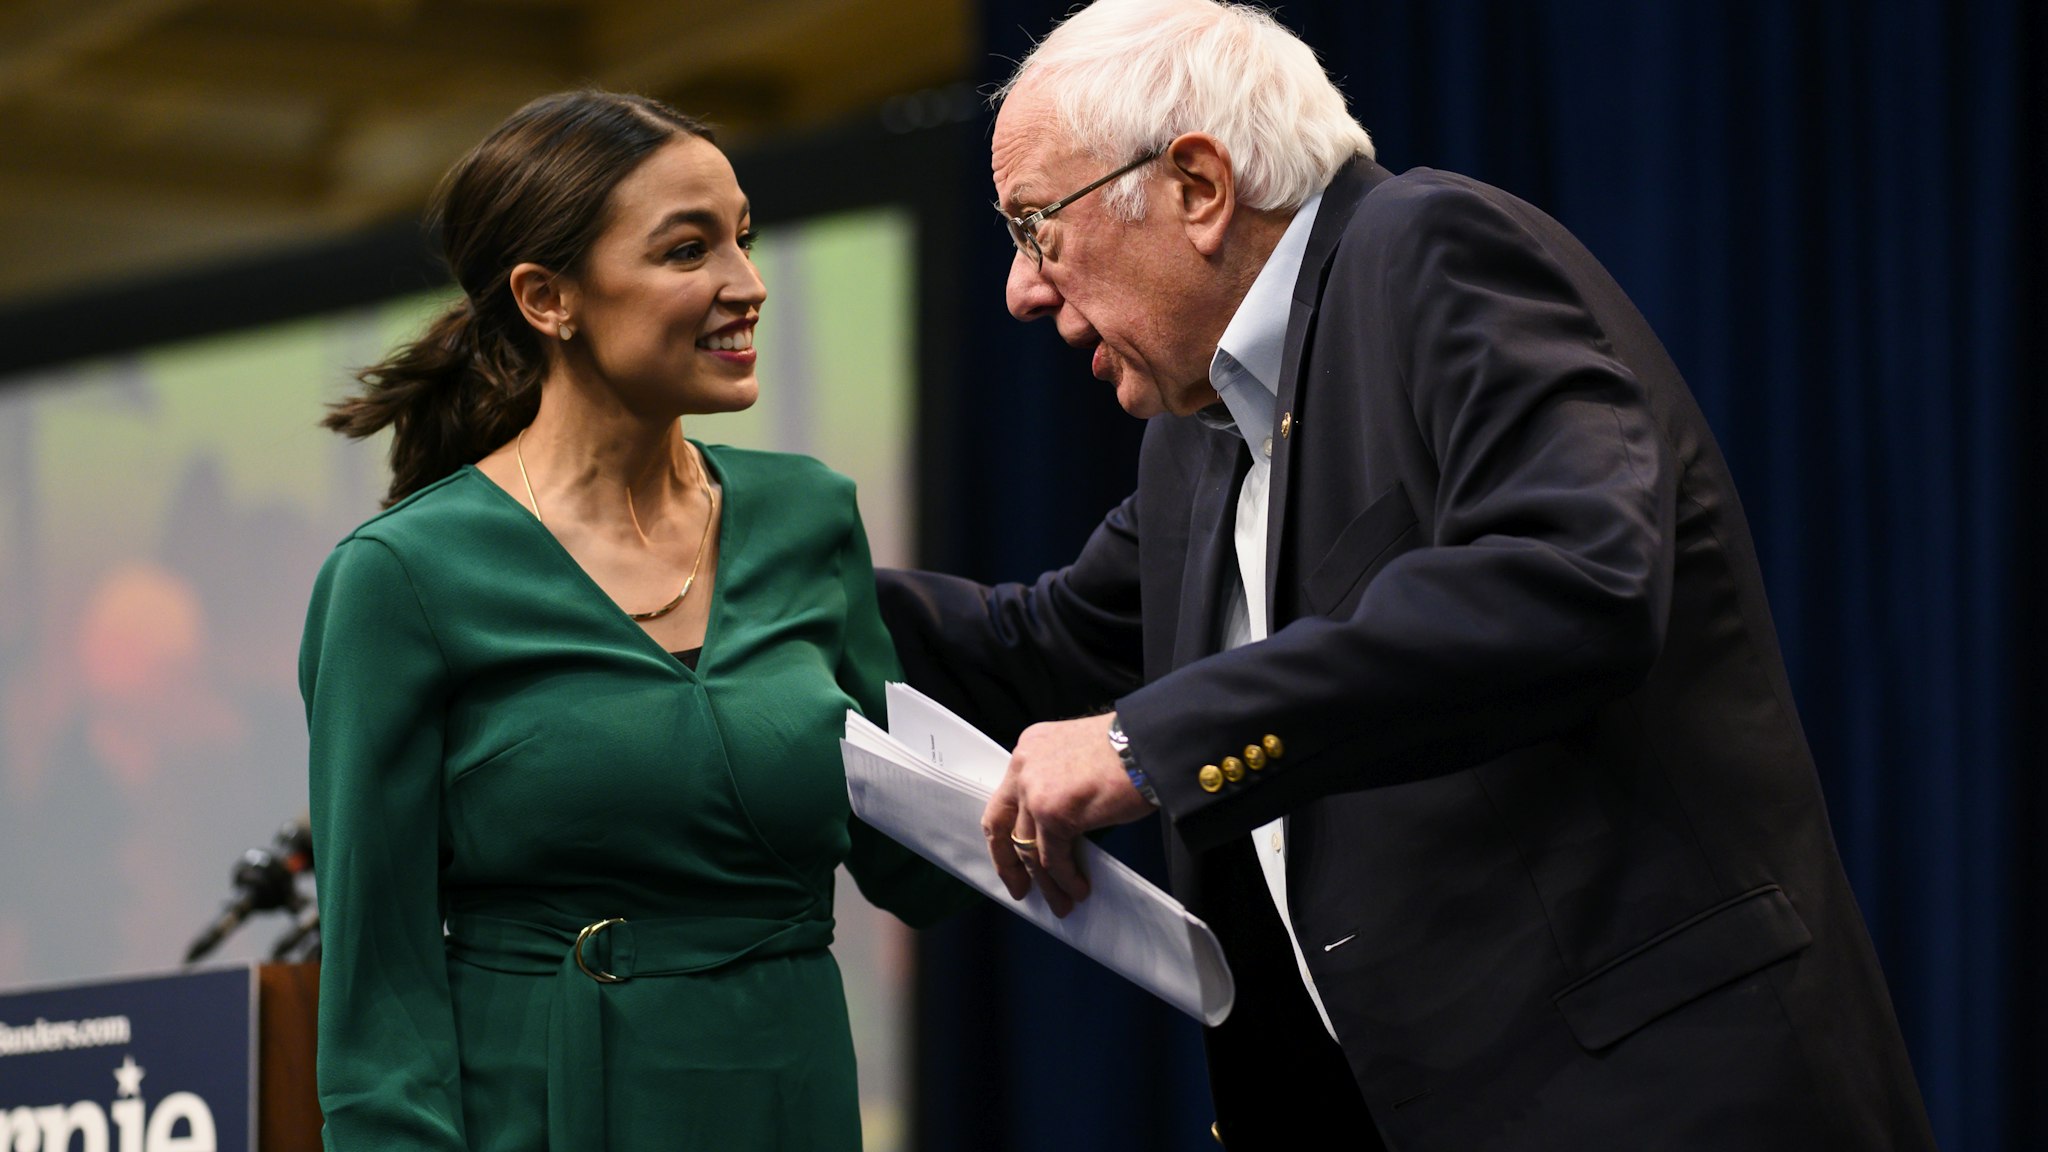 DES MOINES, IA - NOVEMBER 09: U.S. Rep. Alexandria Ocasio-Cortez (D-NY) is joined on stage by Democratic Presidential candidate Bernie Sanders (I-VT) during the Climate Crisis Summit at Drake University on November 9, 2019 in Des Moines, Iowa. Sanders, Ocasio-Cortez, and author Naomi Klein spoke about the current state of climate change in relation to U.S. policy. (Photo by Stephen Maturen/Getty Images)